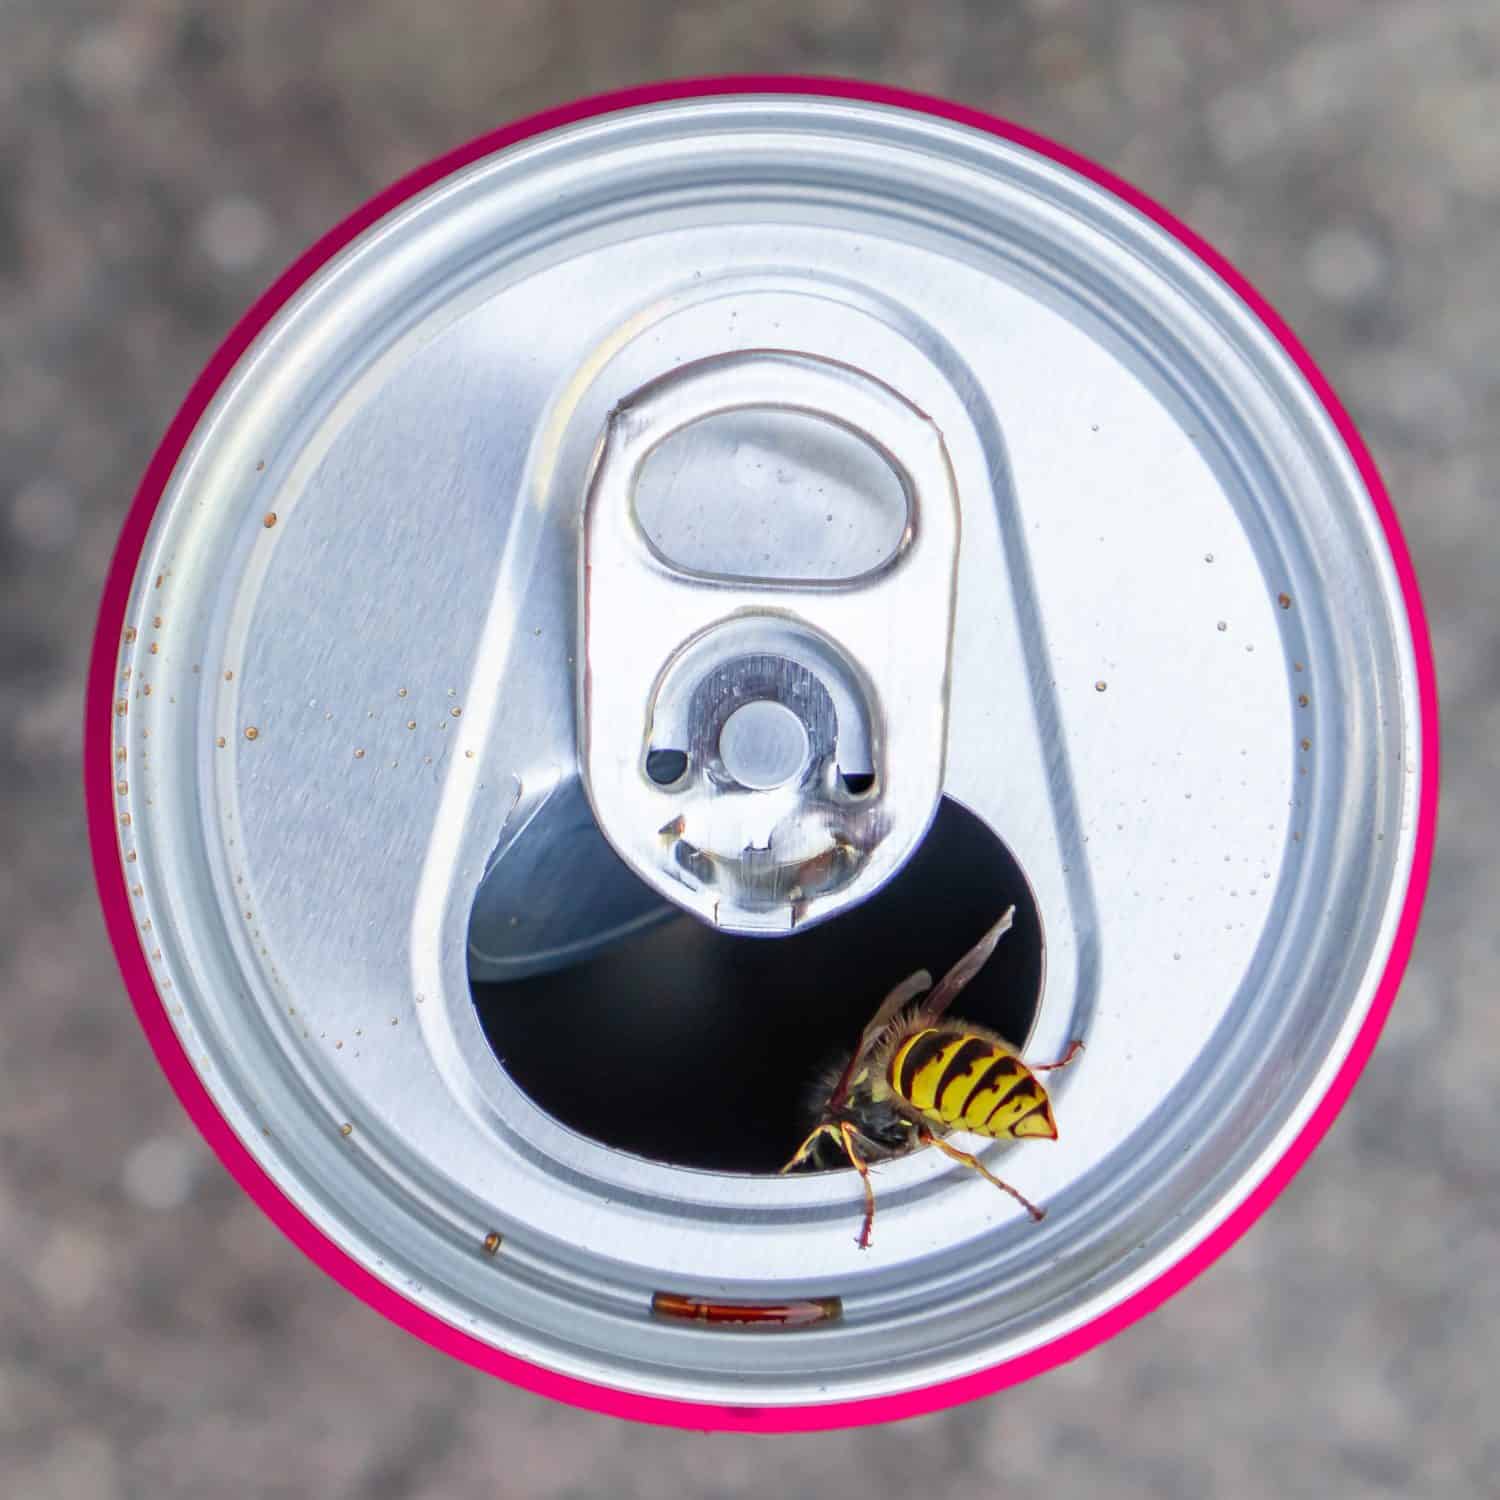 Opened soda can with wasp, yellowjacket, view from above